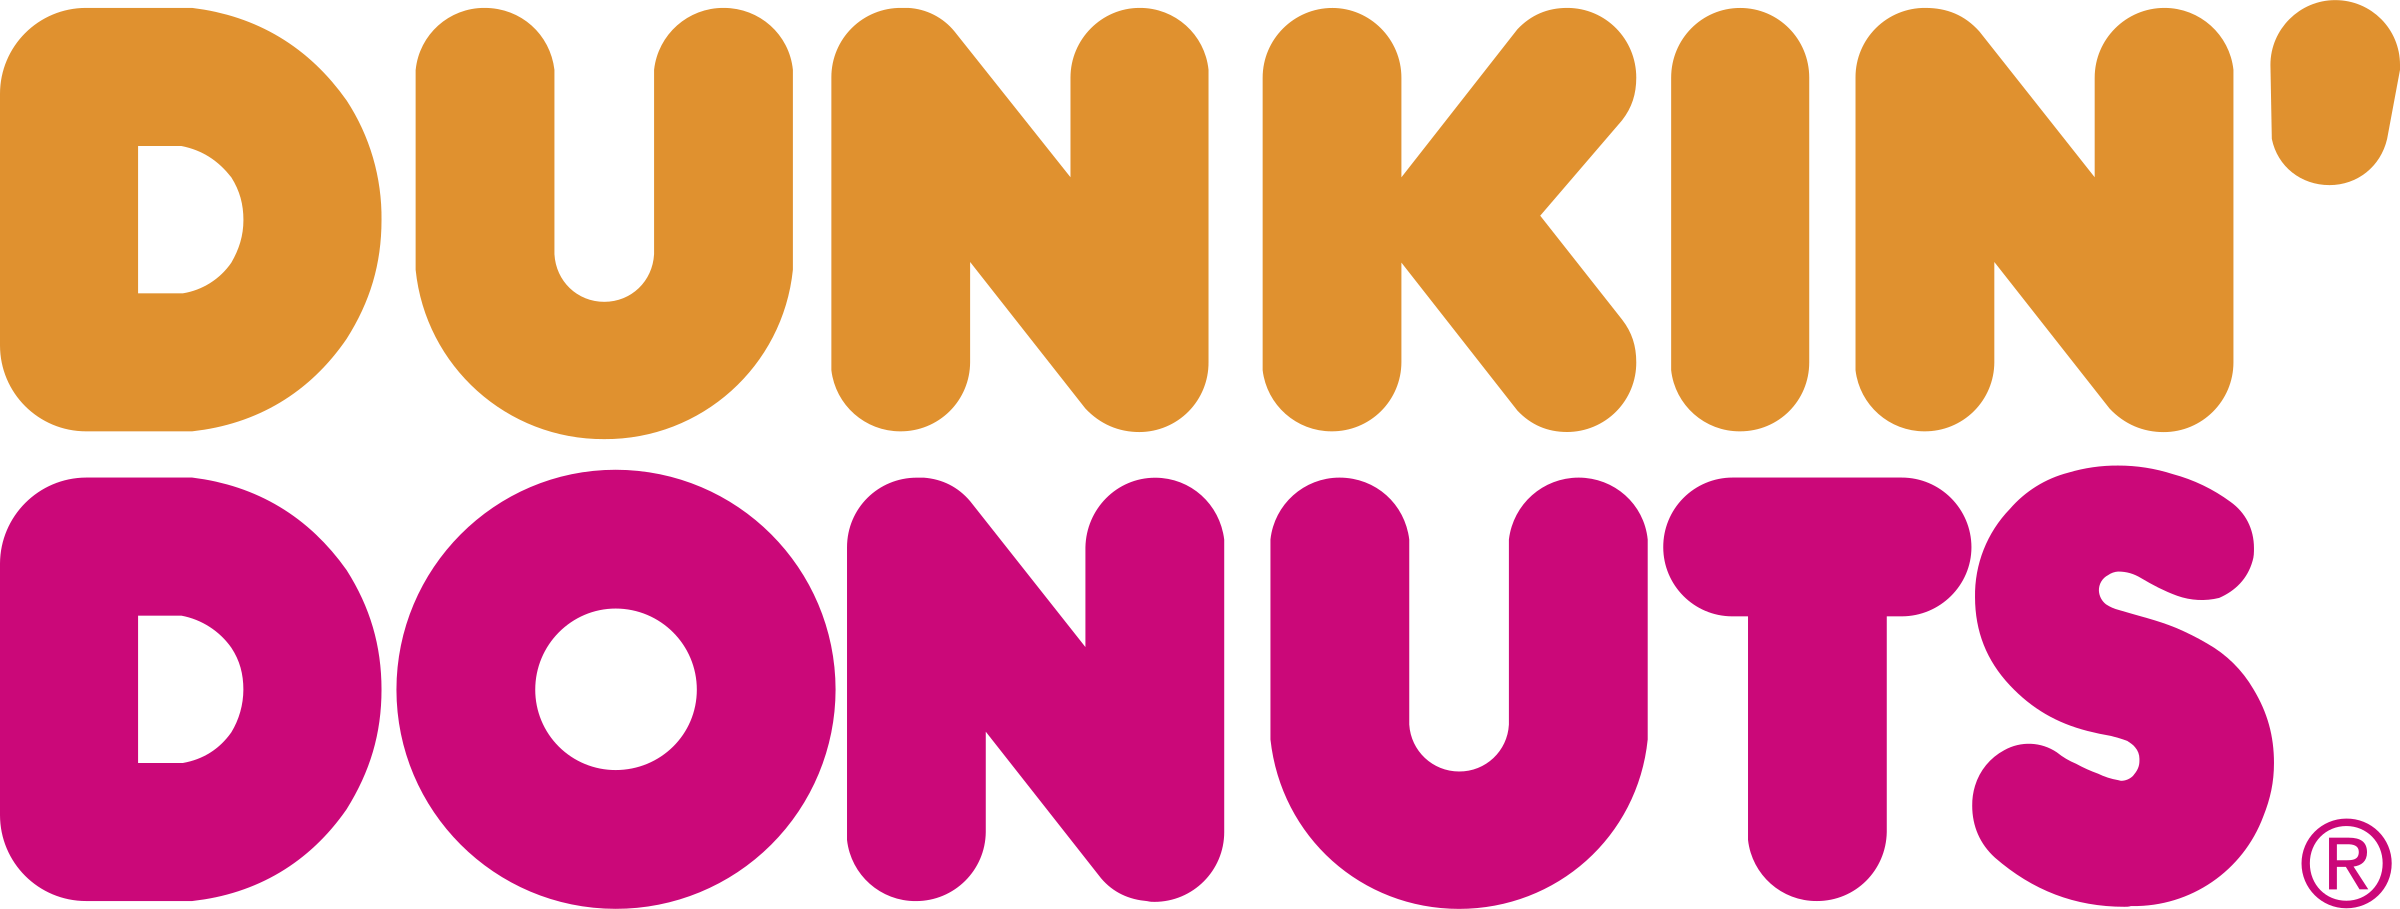 Dunkin Donuts Logo PNG File